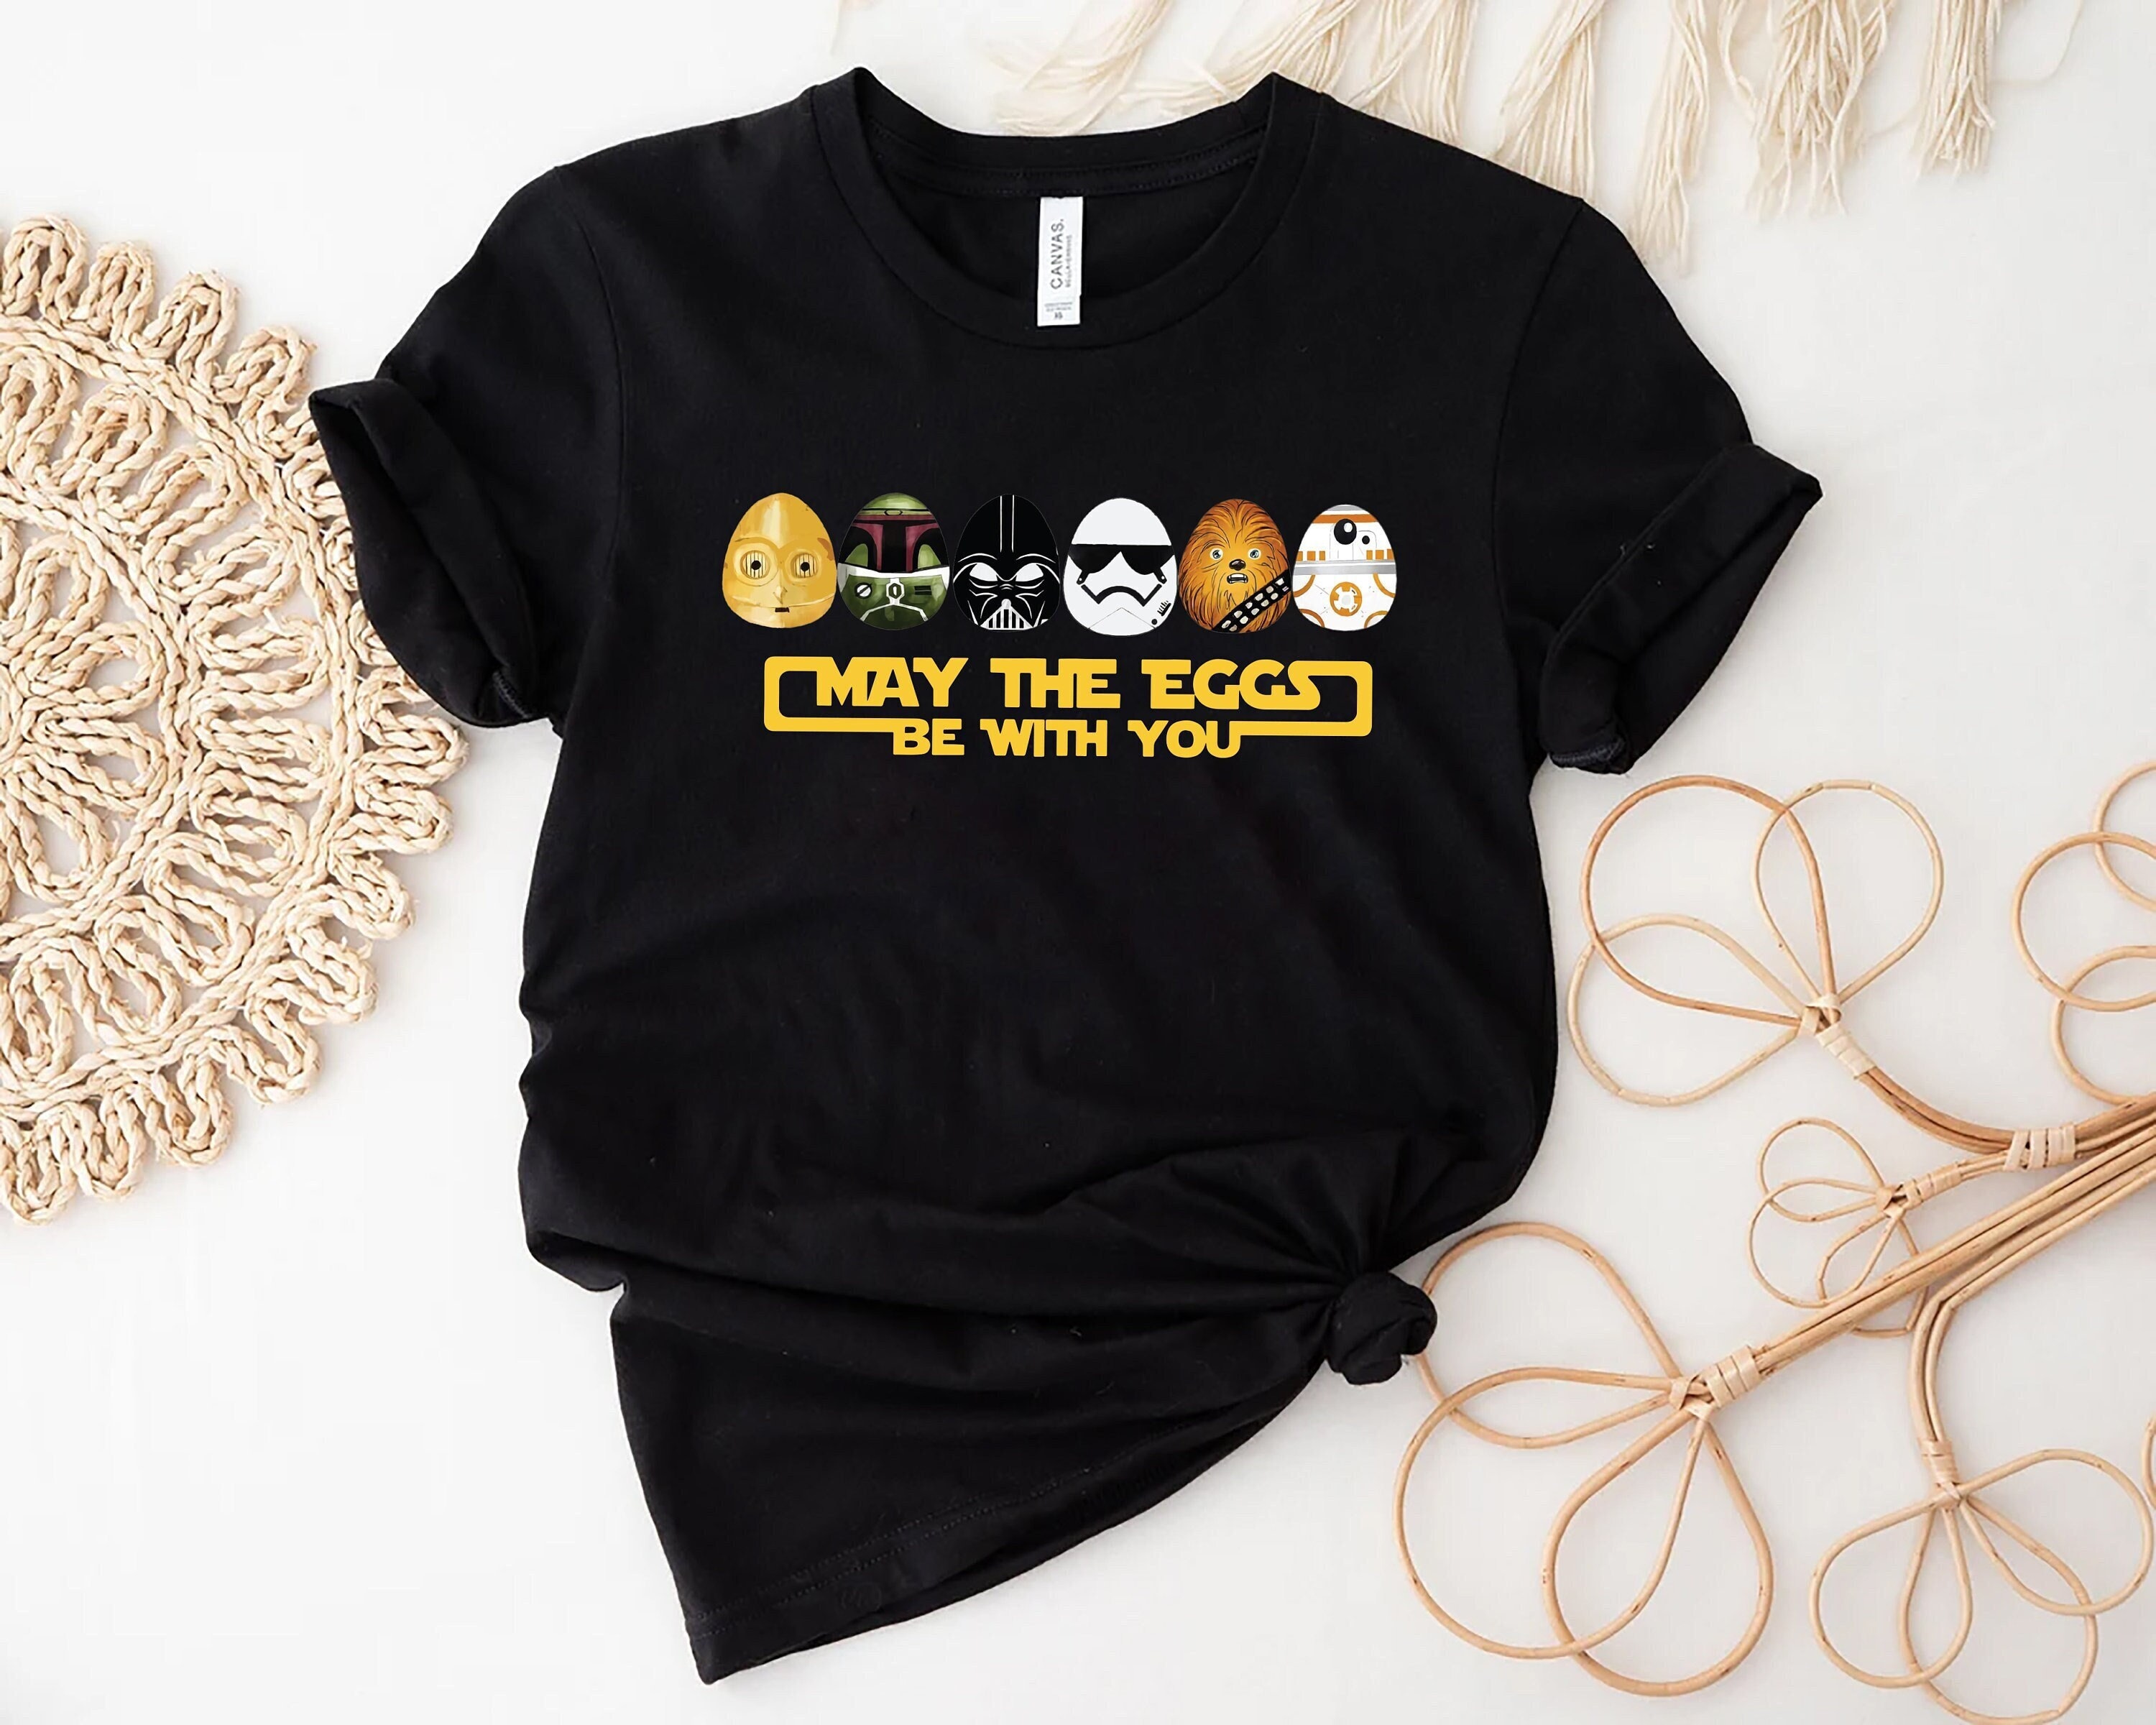 may the eggs be with you shirt easter eggs star wars shirt star wars characters easter eggs shirt 5078 eo4lf